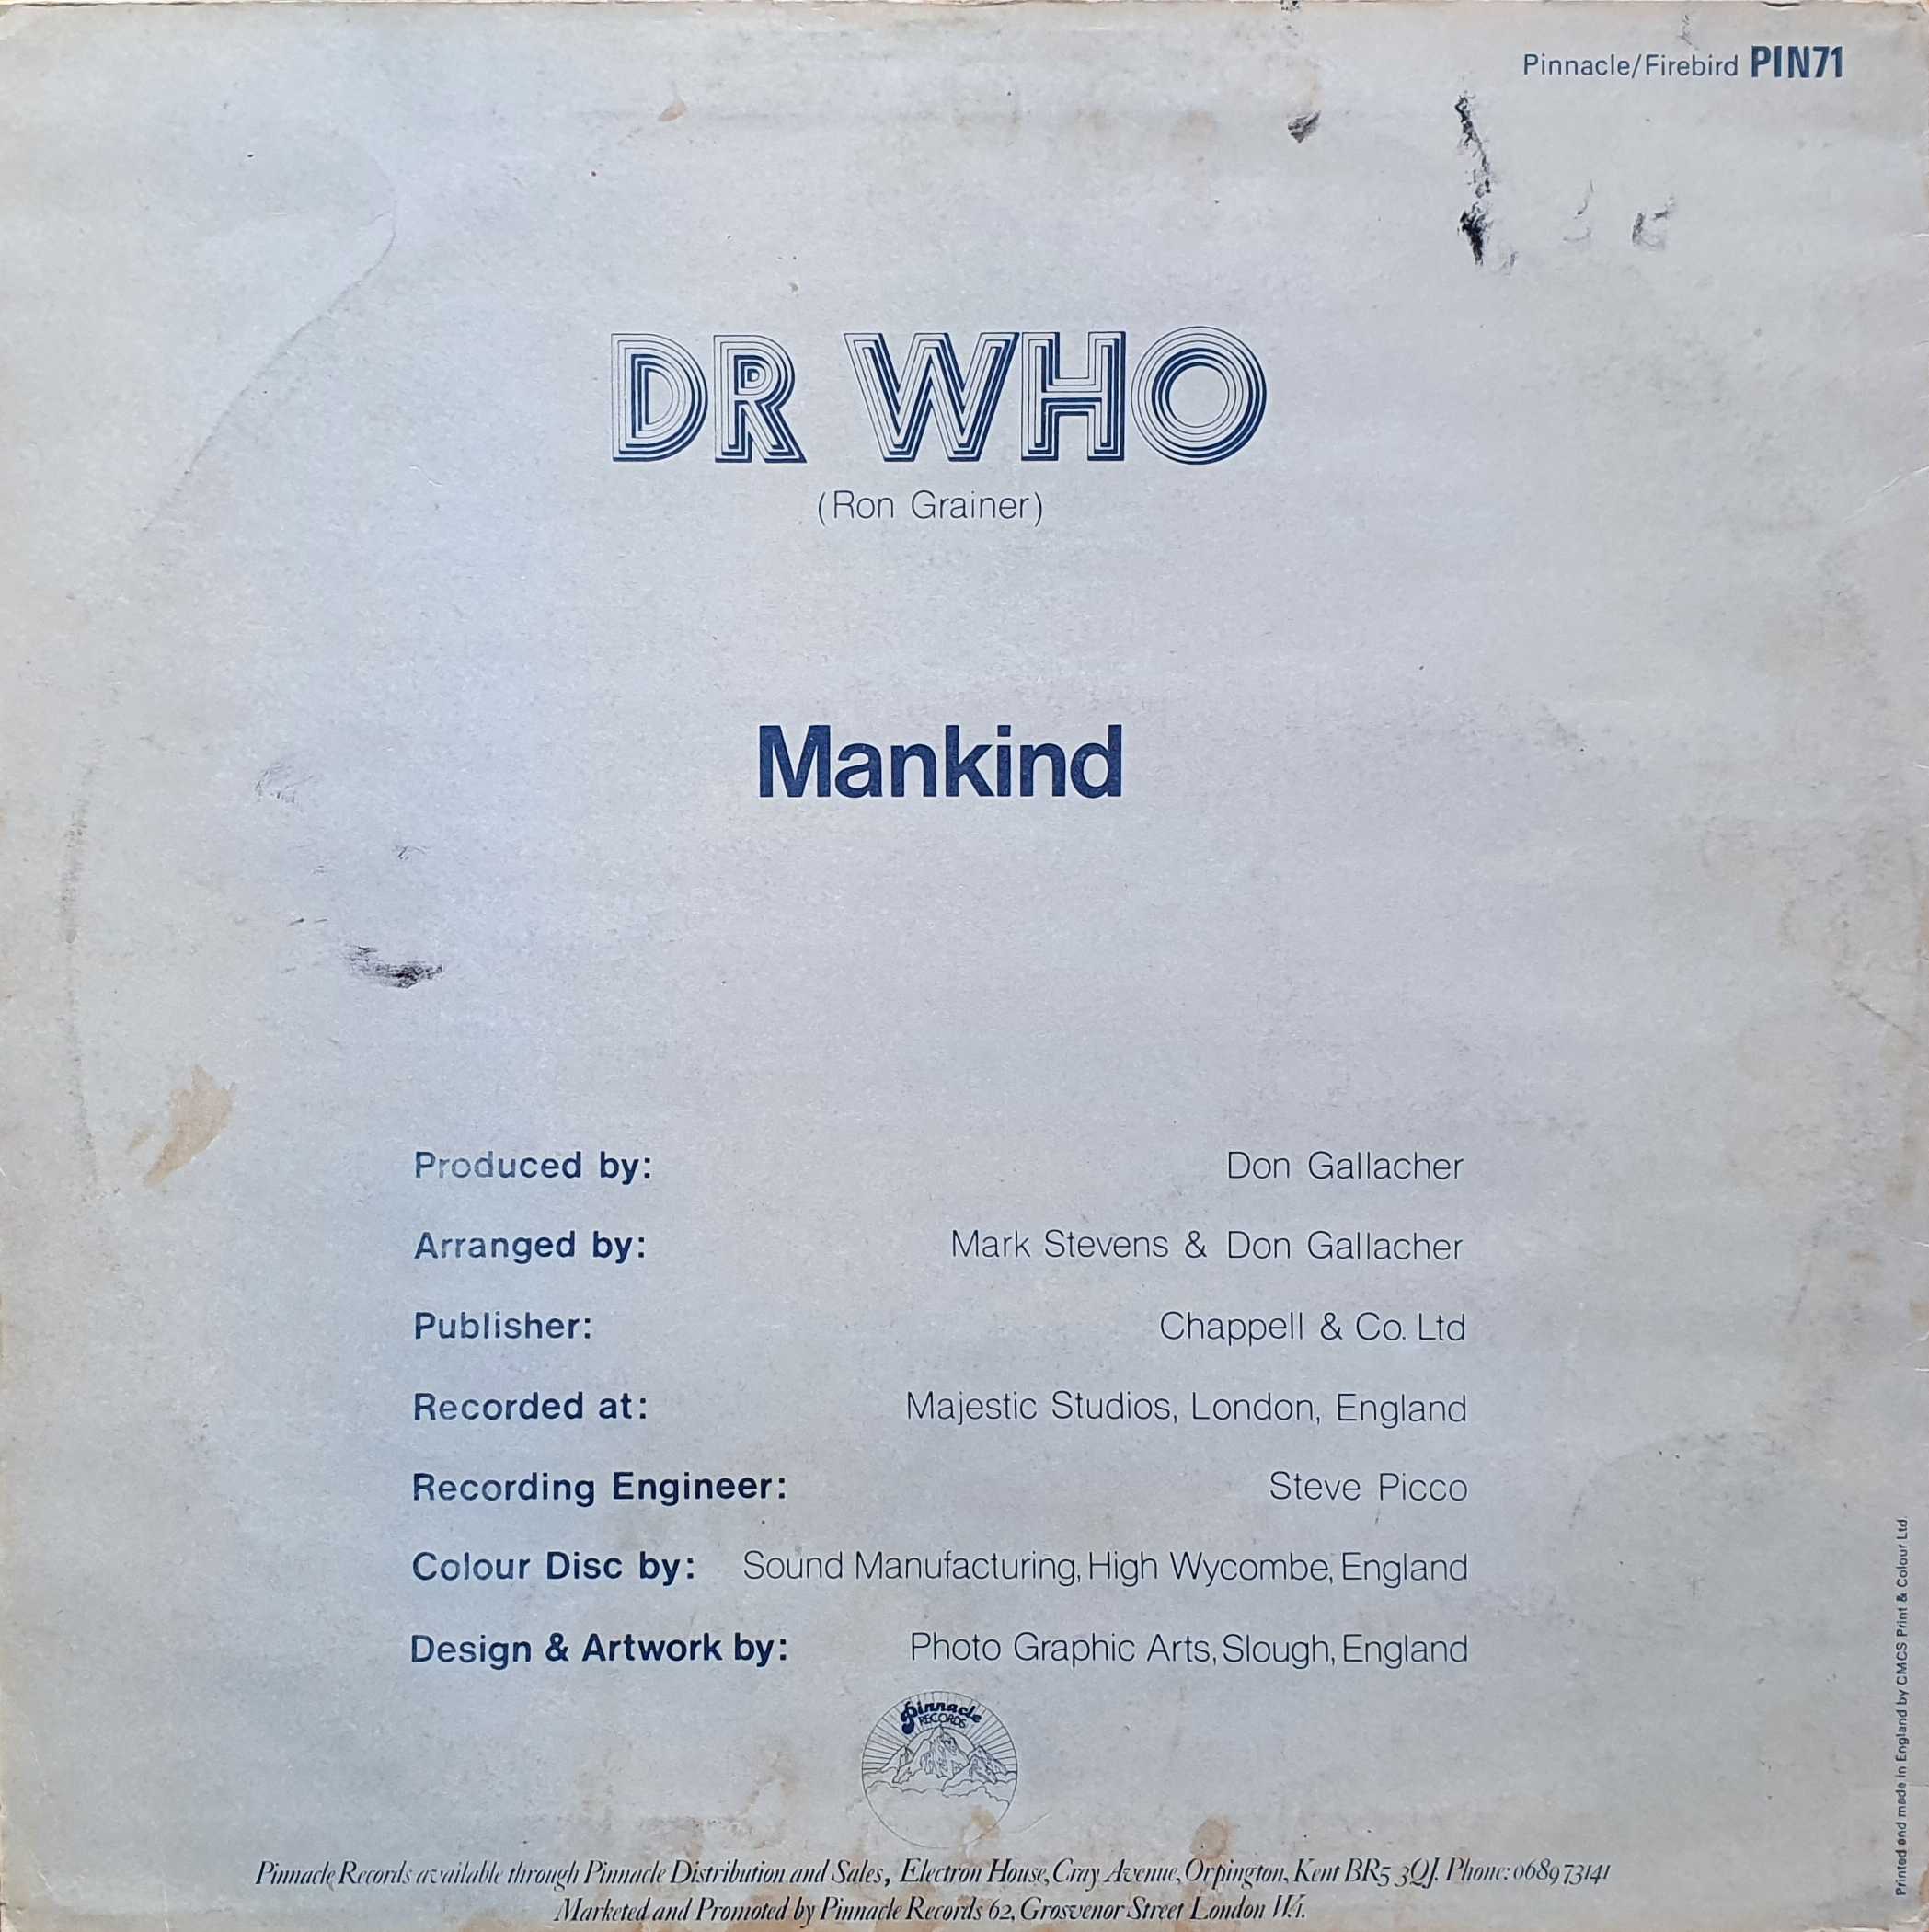 Picture of PIN 71-12 BR Doctor Who (Cosmic remix) by artist Ron Grainer / Mark Stevens / Mankind from the BBC records and Tapes library